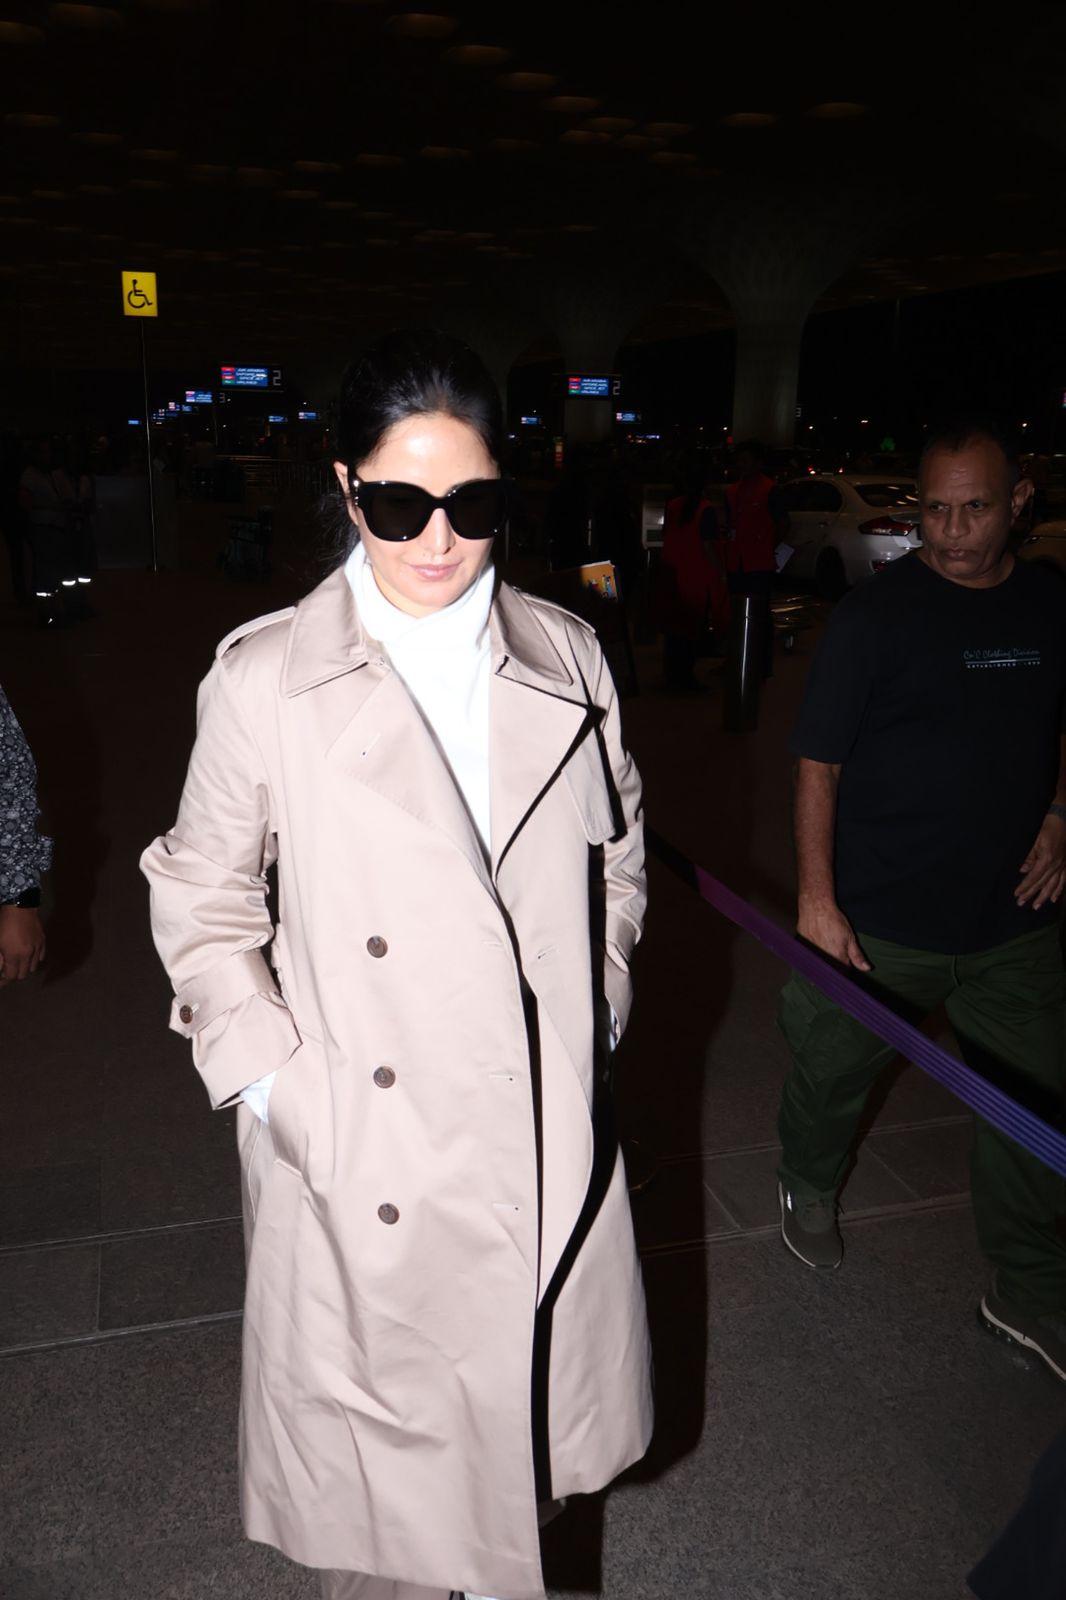 Katrina Kaif opted for smart winter wear to ace her airport look